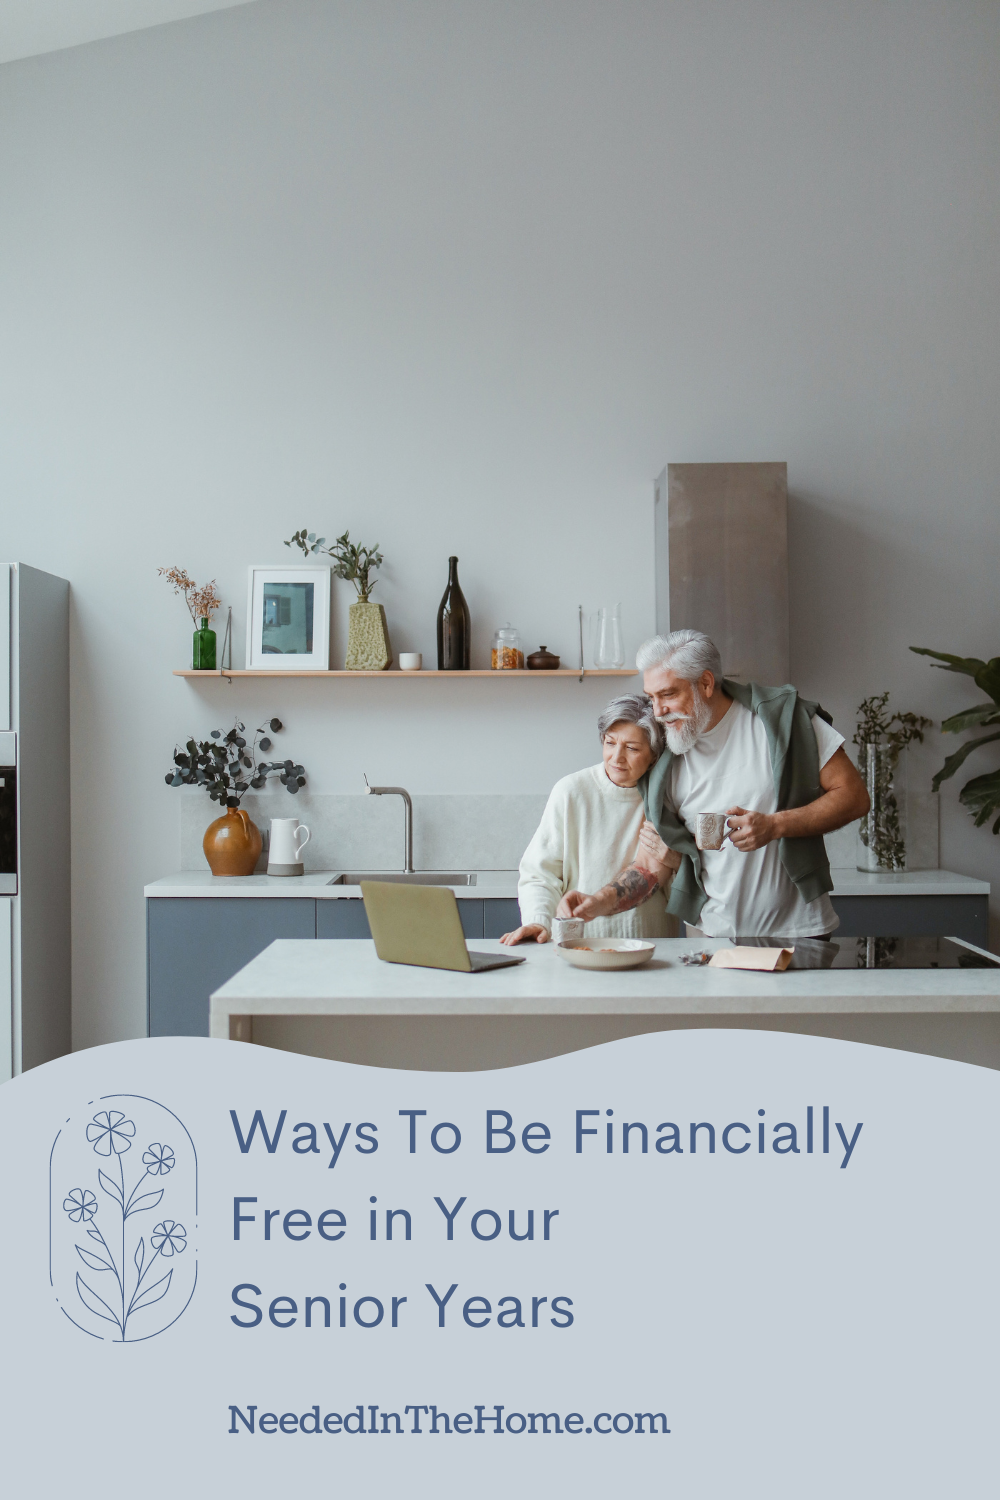 pinterest-pin-description ways to be financially free in your senior years senior couple woman man in kitchen looking at laptop using ingredients to try online recipe flowers neededinthehome